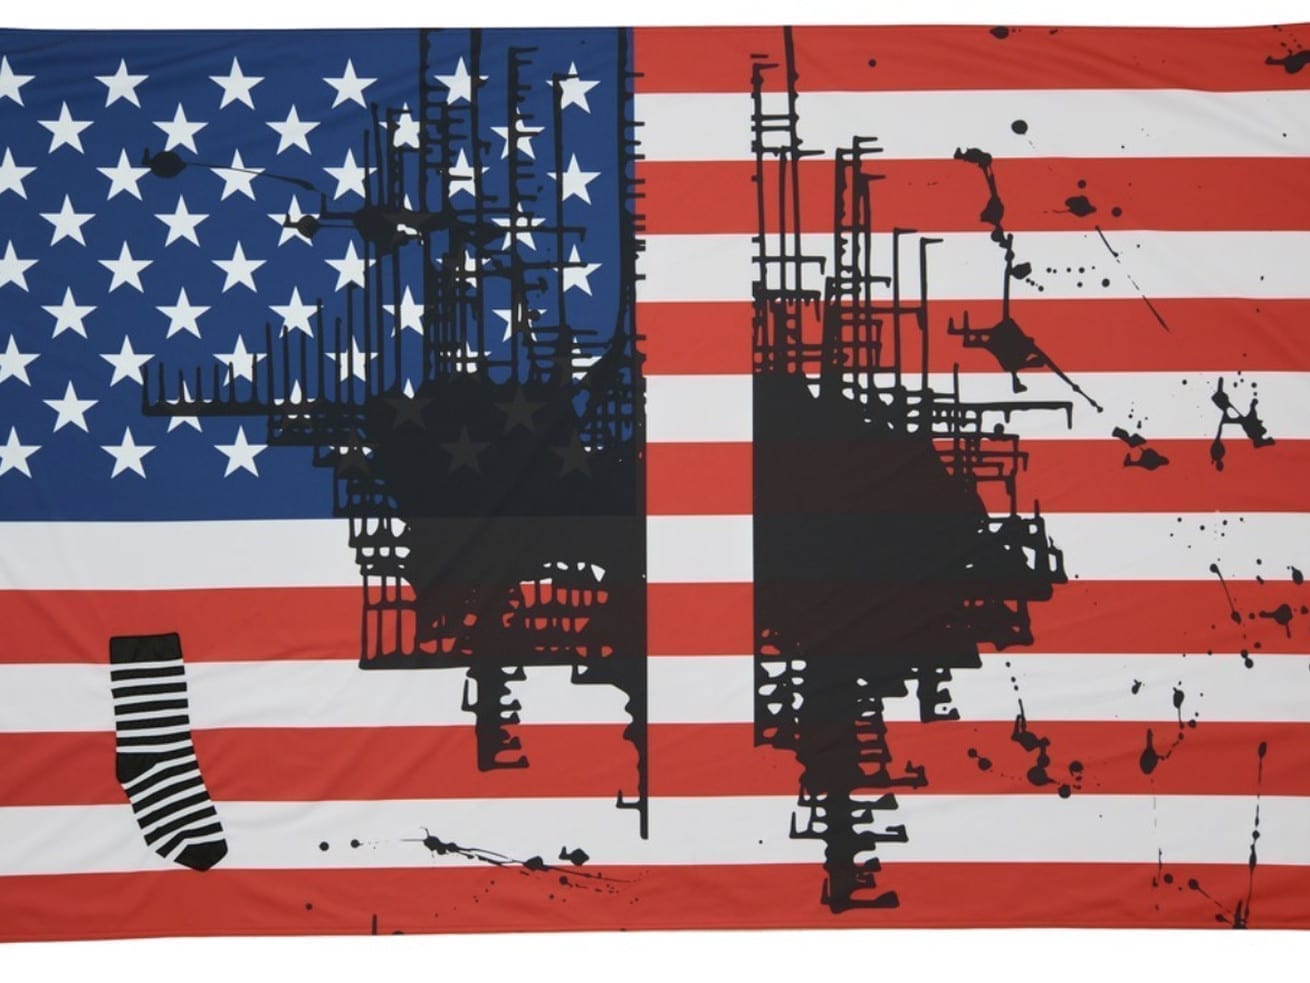 An artist painted on the American flag. The governor of Kansas wants her work destroyed.